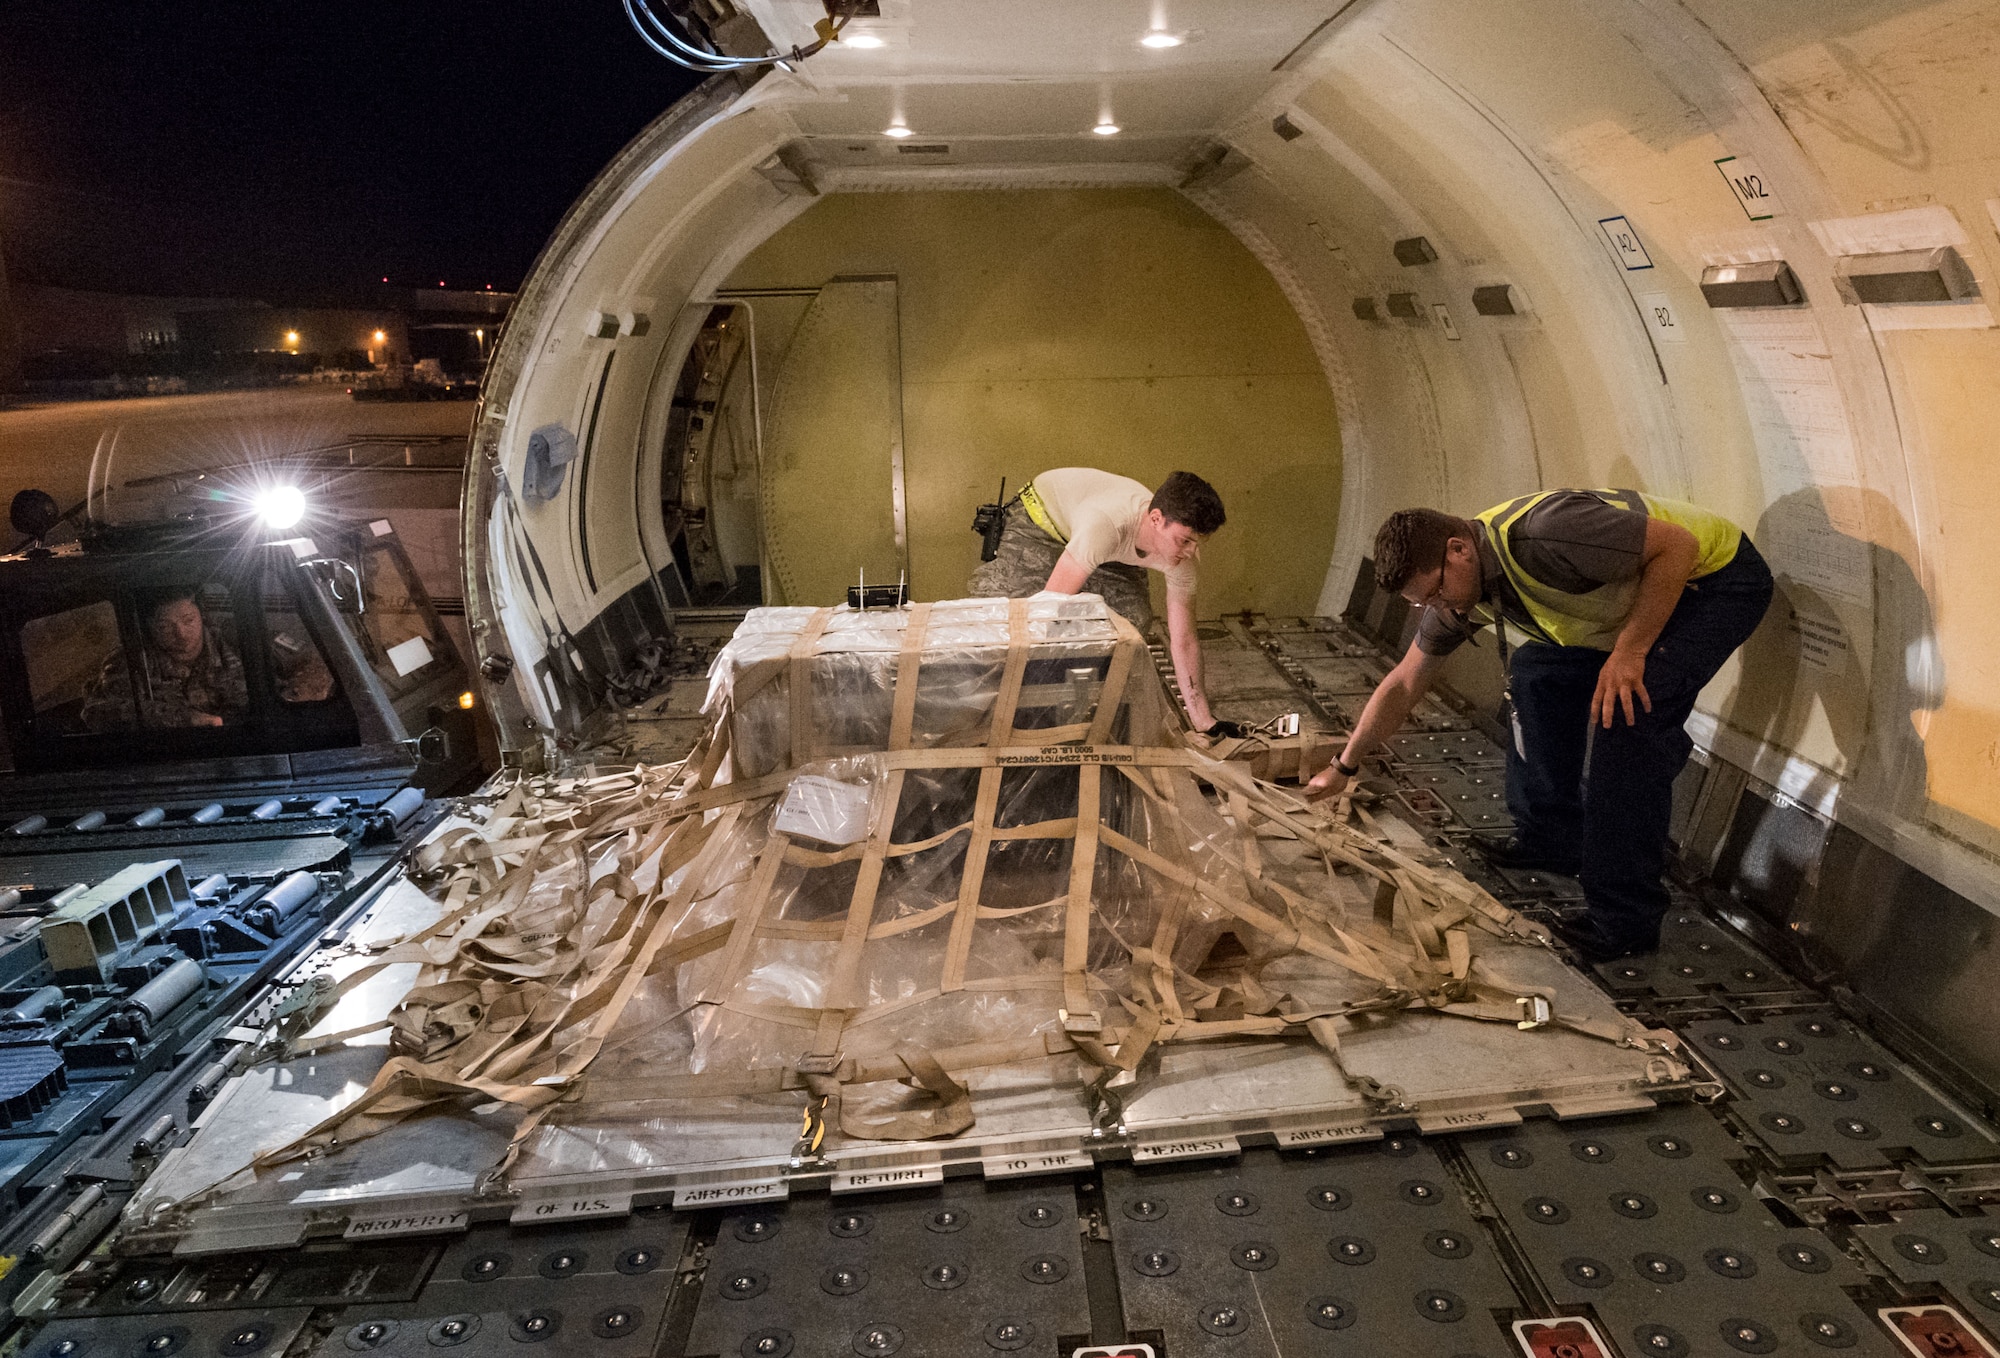 Senior Airman Brandon Sanderell, 436th Aerial Port Squadron ramp services specialist and Brian McDonald, Air Transport International senior loadmaster, position a pallet on an ATI Boeing 757-200 aircraft Sept. 8, 2019, at Dover Air Force Base, Del. The ATI aircraft, part of the Civil Reserve Air Fleet program, was contracted to transport cargo and 30 Team Dover personnel to Fairchild AFB, Wash., participating in Mobility Guardian 2019. “This mission is multidimensional and will provide a greater understanding of the commercial airlift capabilities and requirements across Air Mobility Command and the commercial airlift enterprise,” said Maj. Adam Crane, AMC Headquarters CRAF Branch Chief, Scott AFB, Ill. (U.S. Air Force photo by Roland Balik)